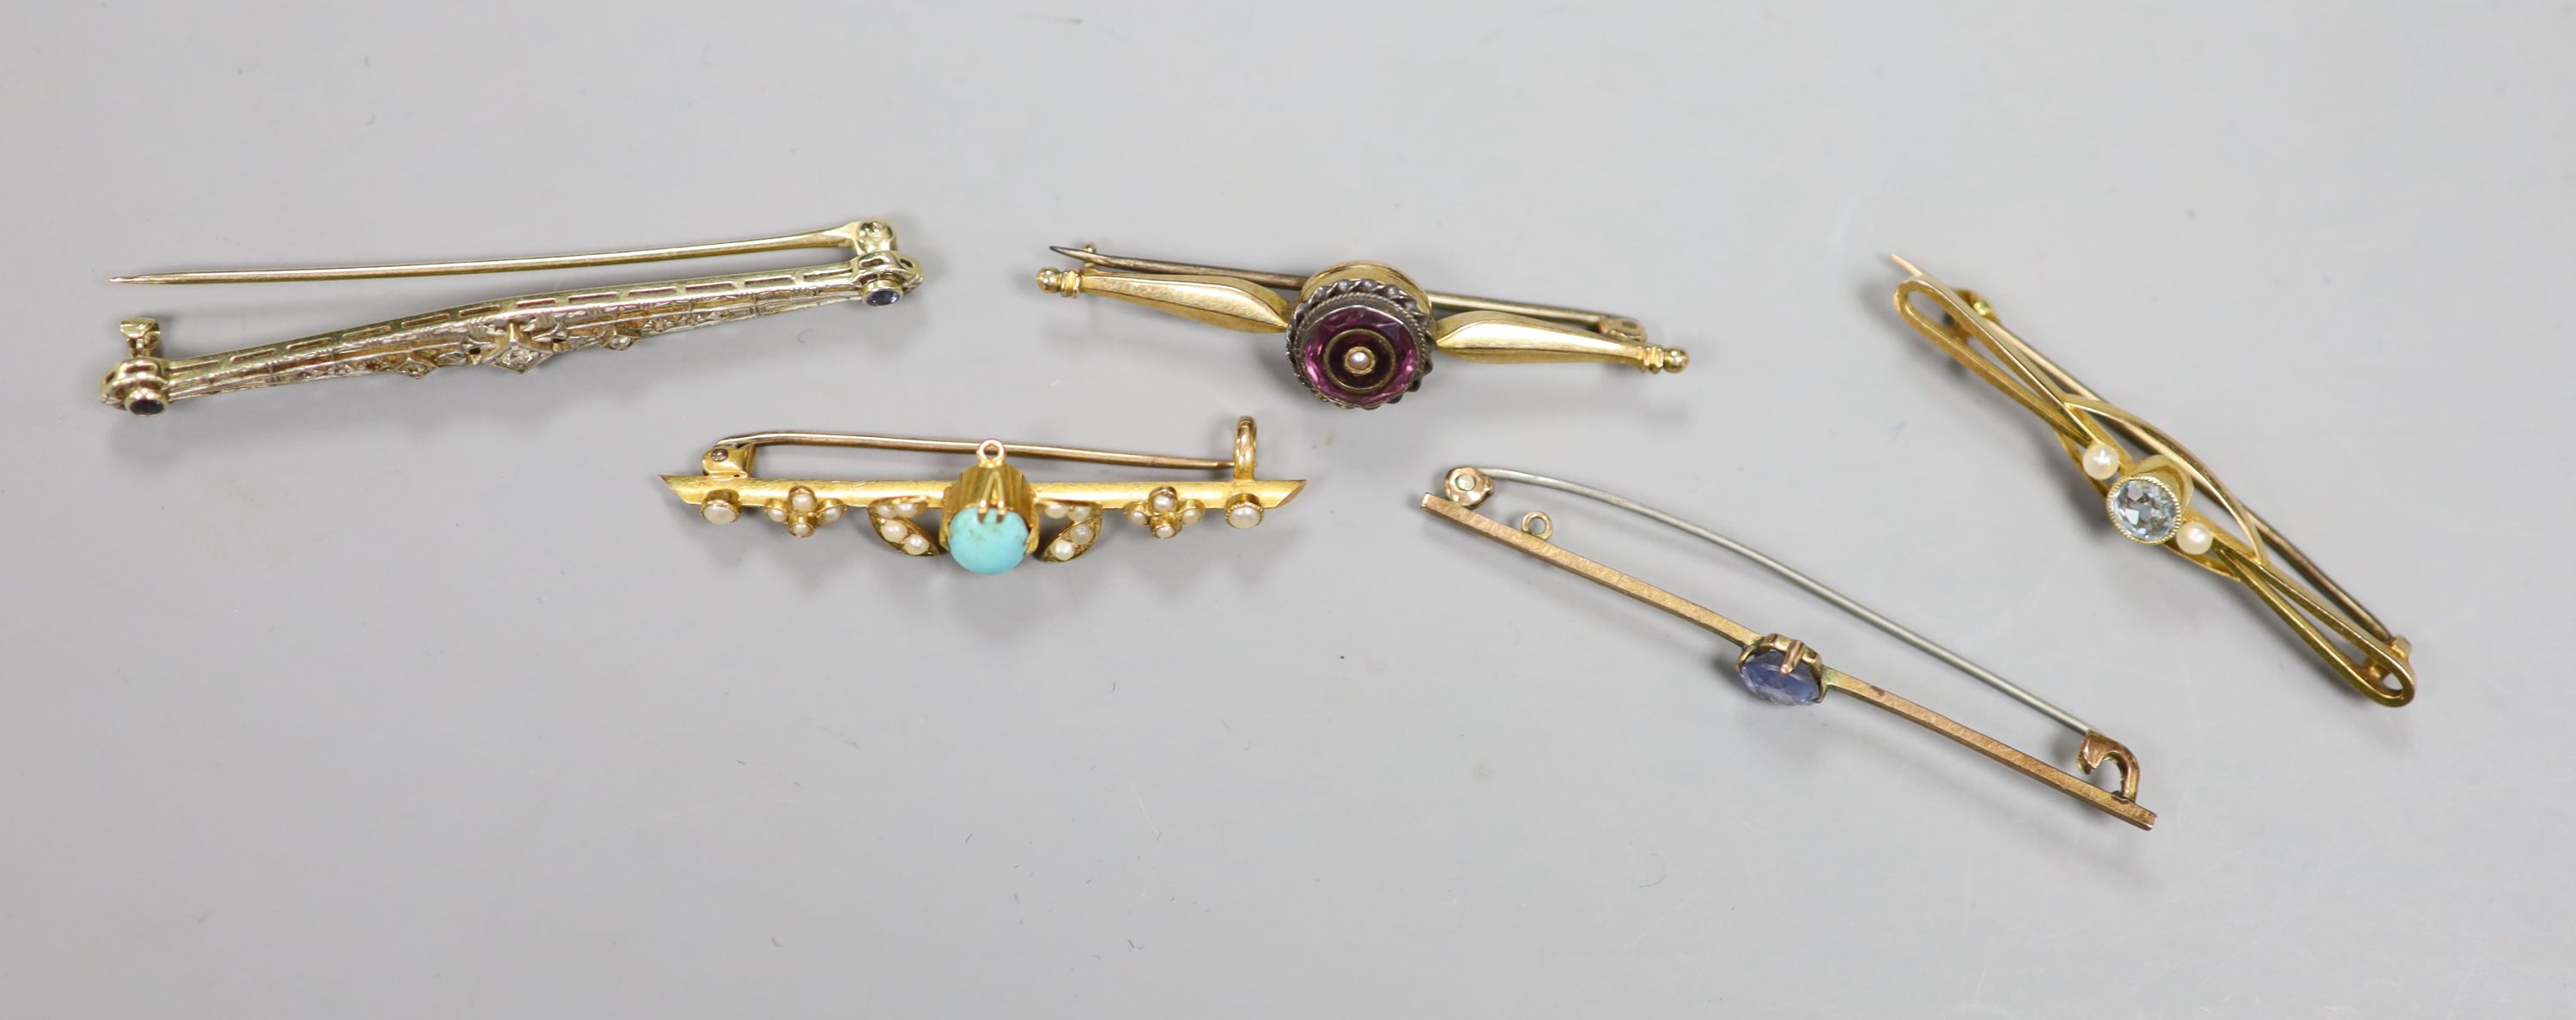 5 assorted bar brooches.